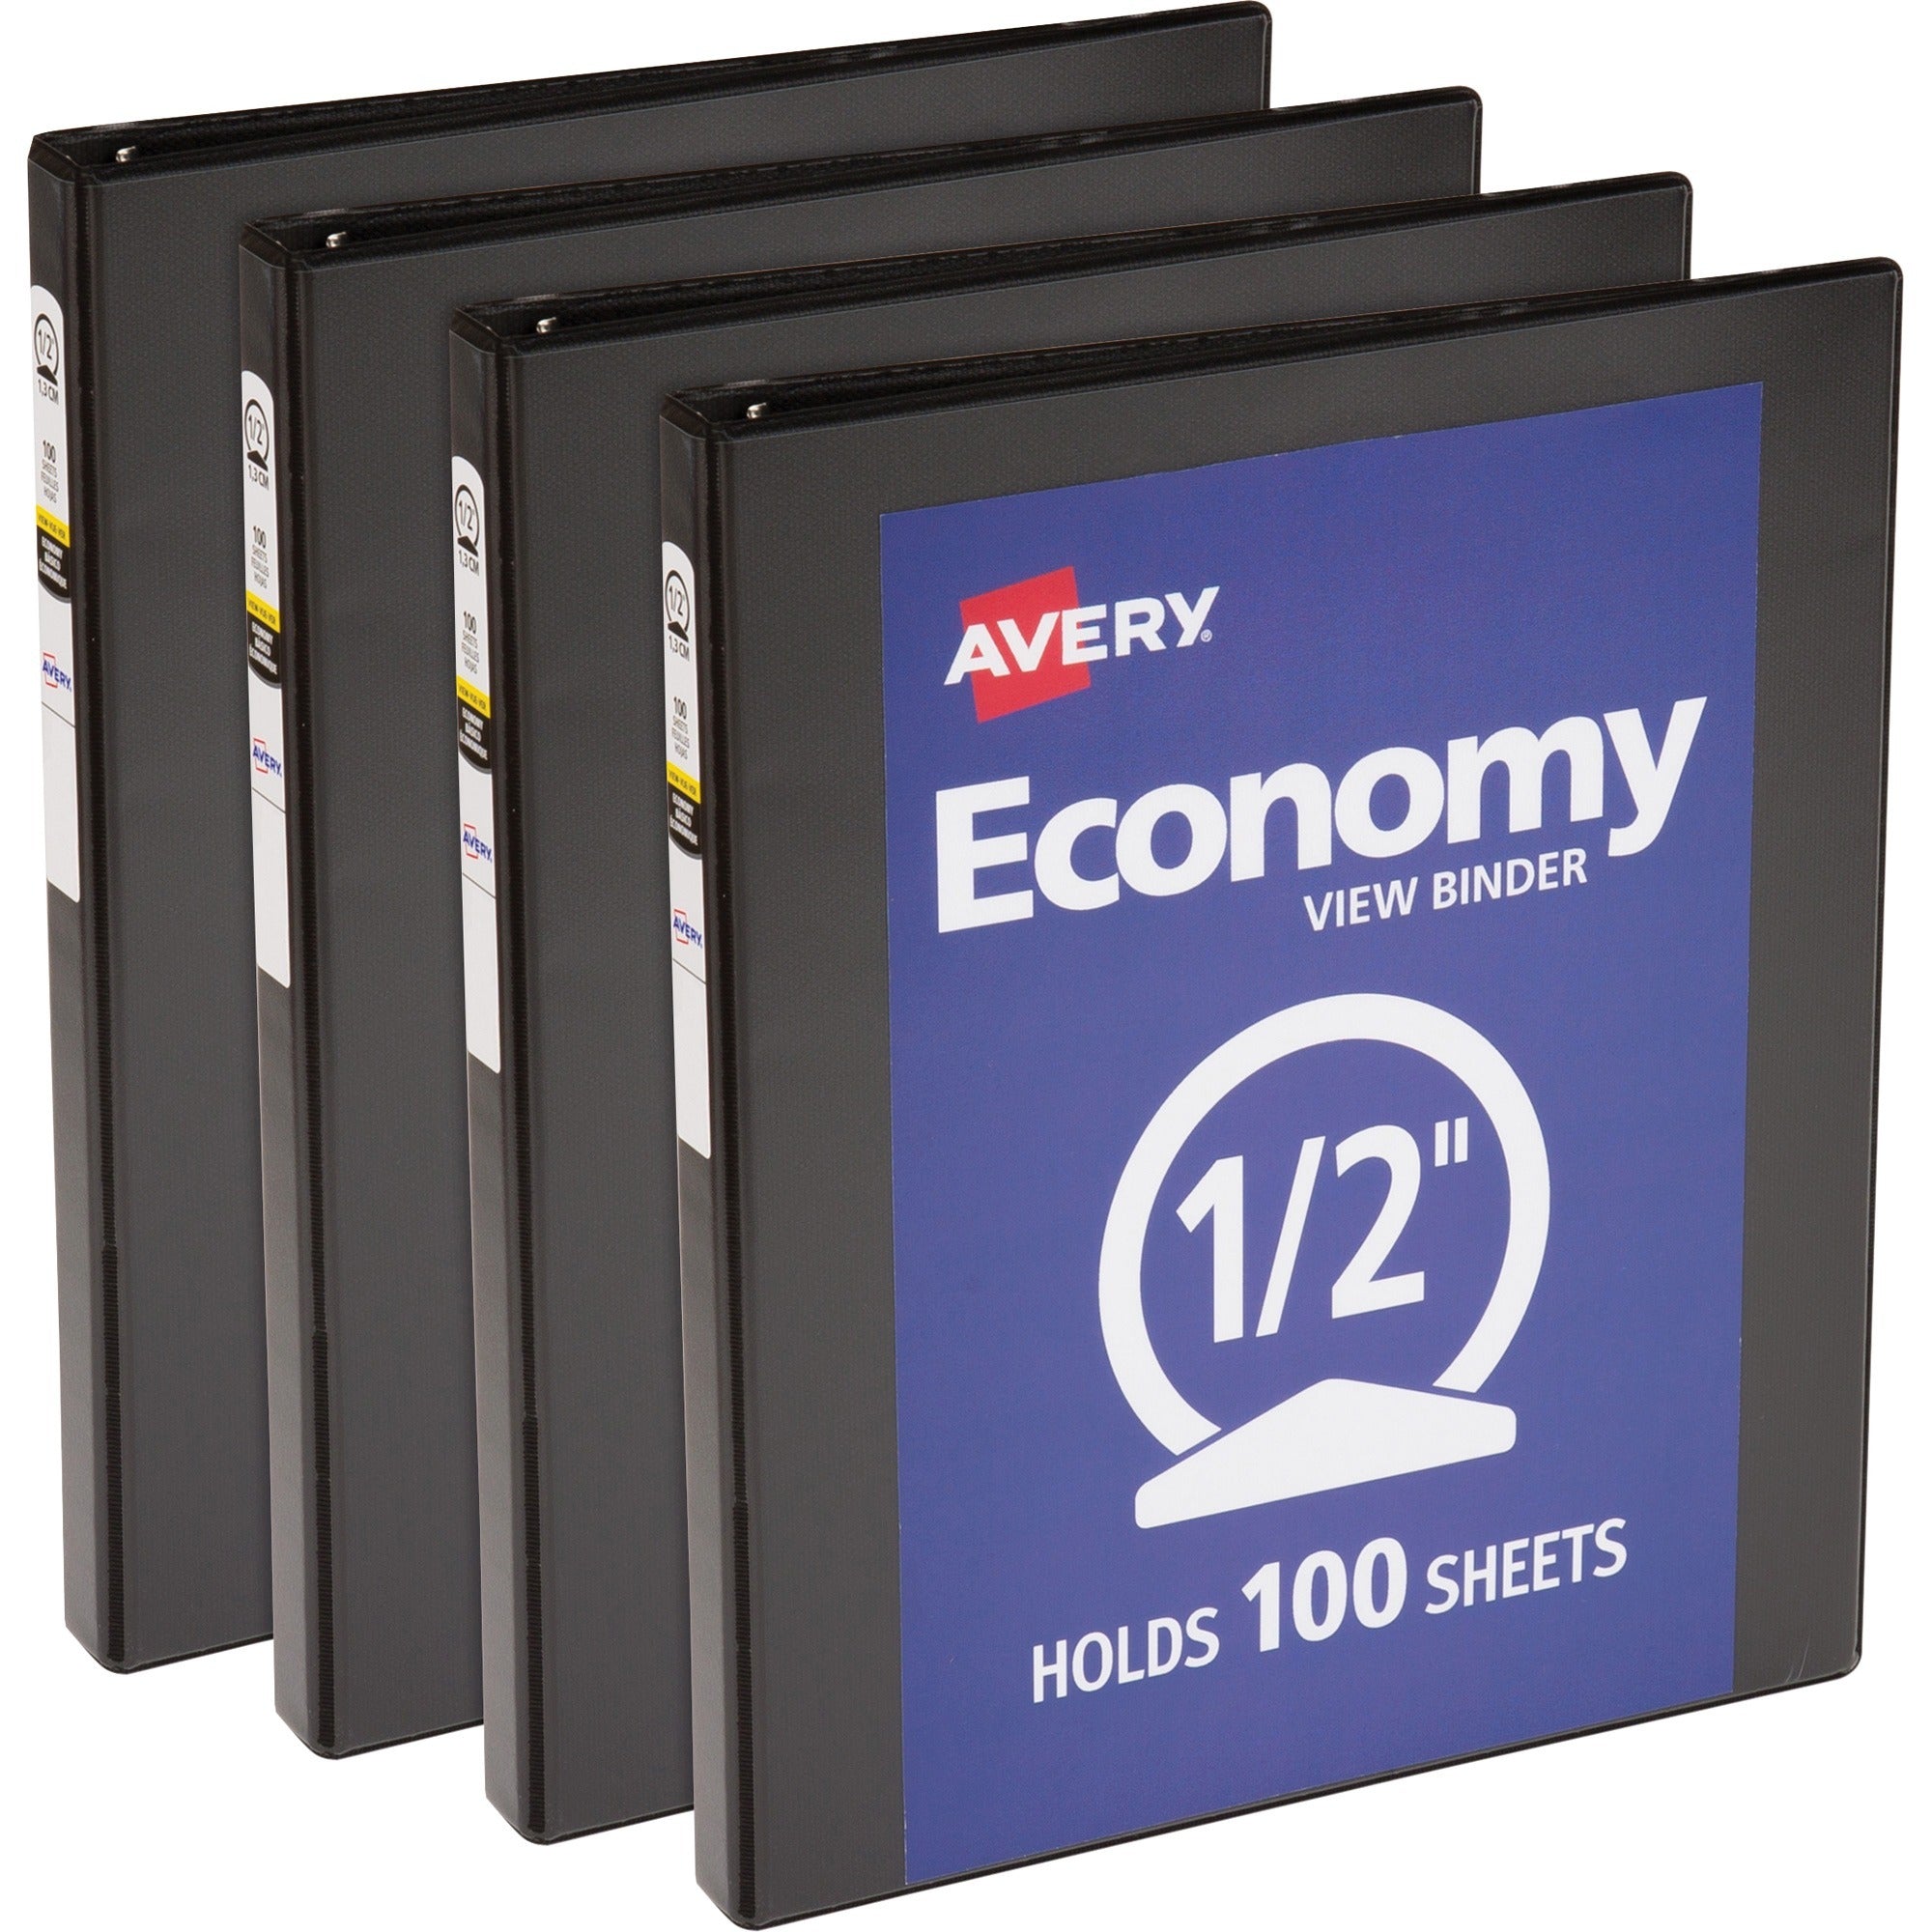 avery-economy-view-binder_ave05705bd - 1